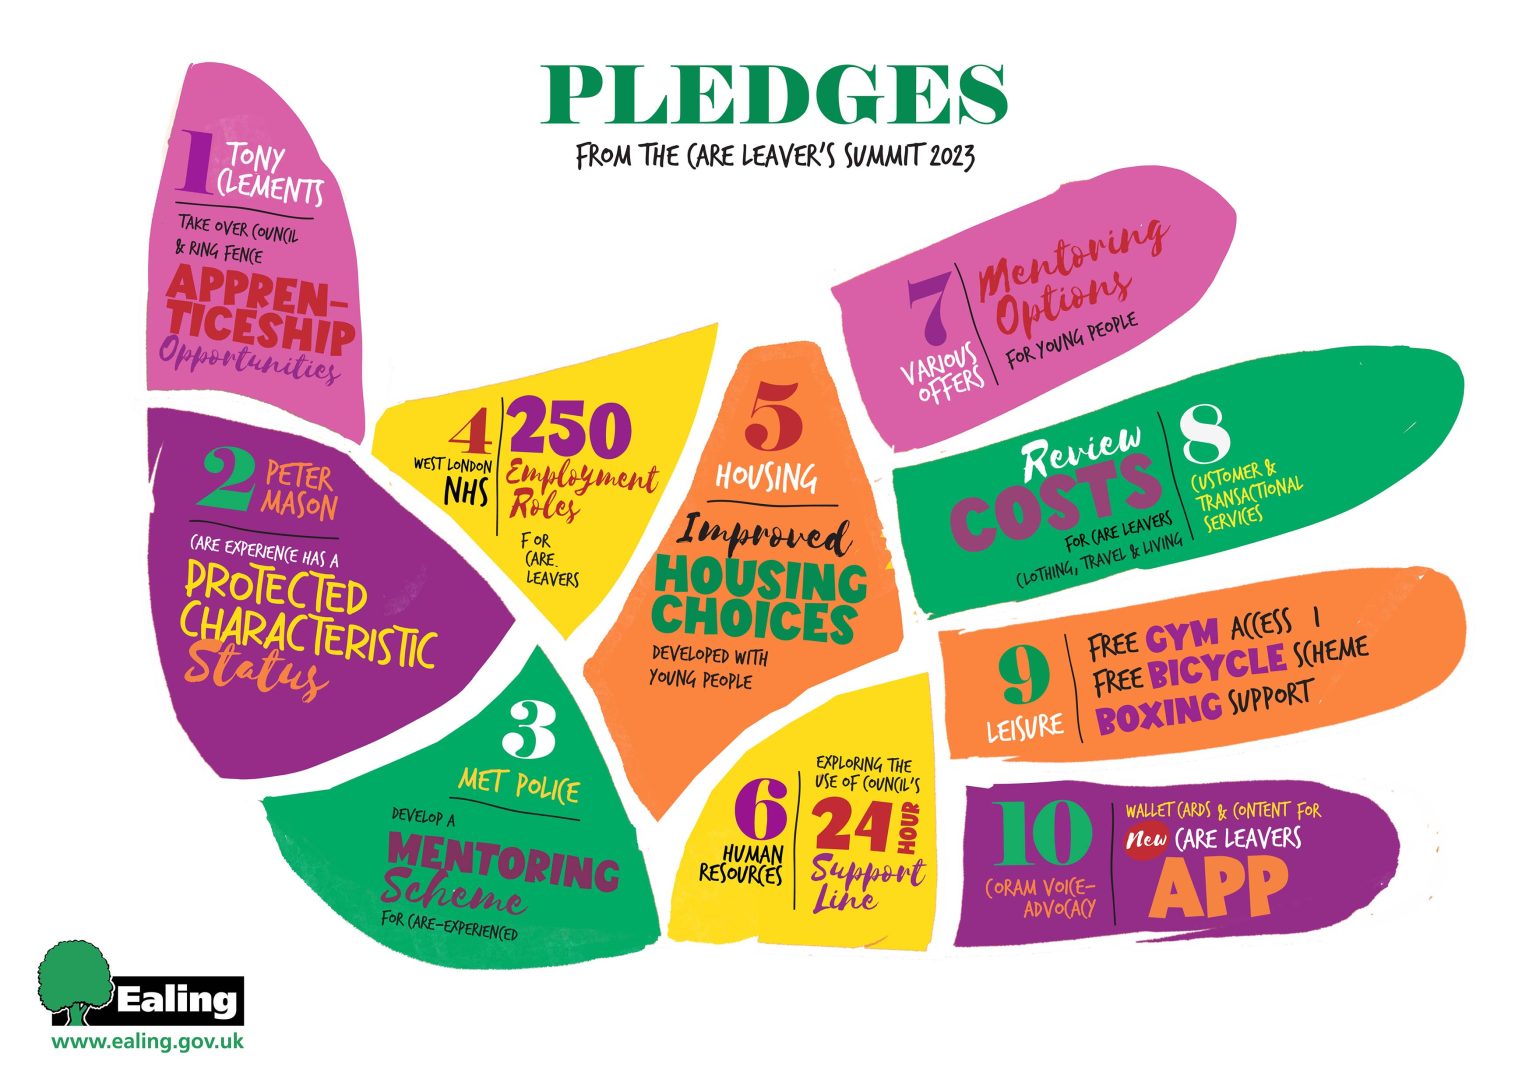 Illustration of corporate pledges to support care leavers